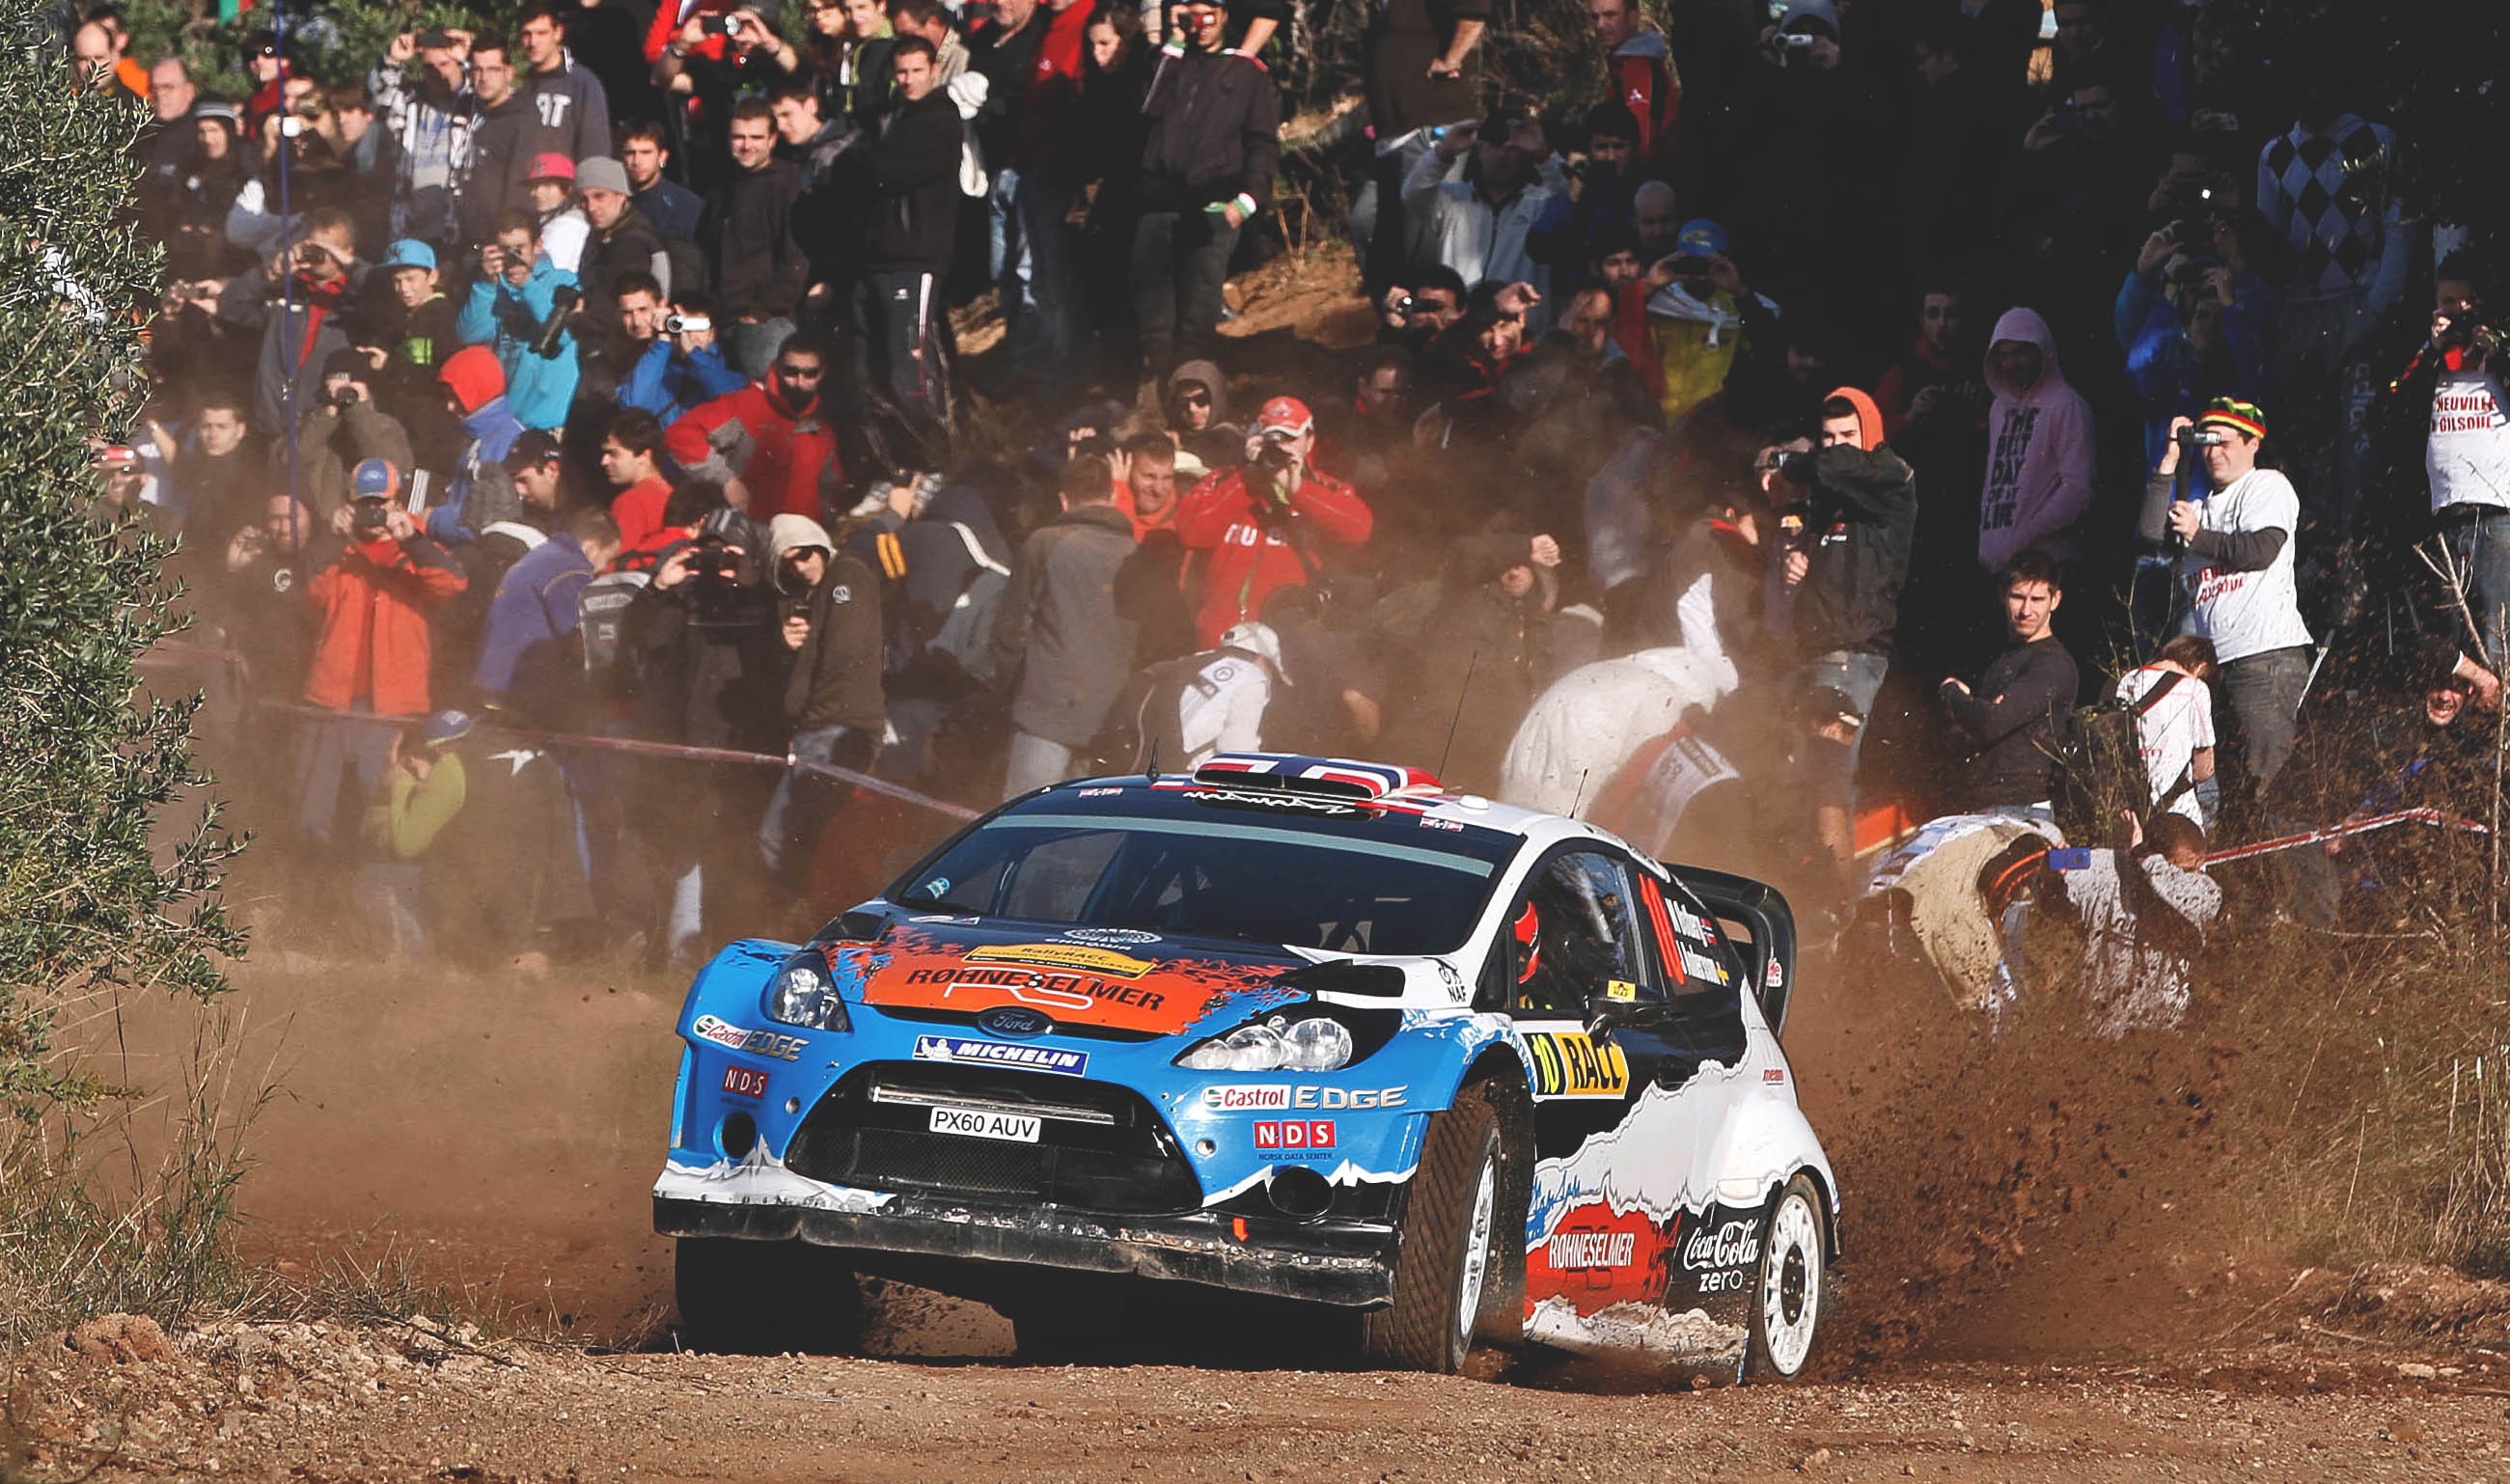 Sports Rallying HD Wallpaper | Background Image